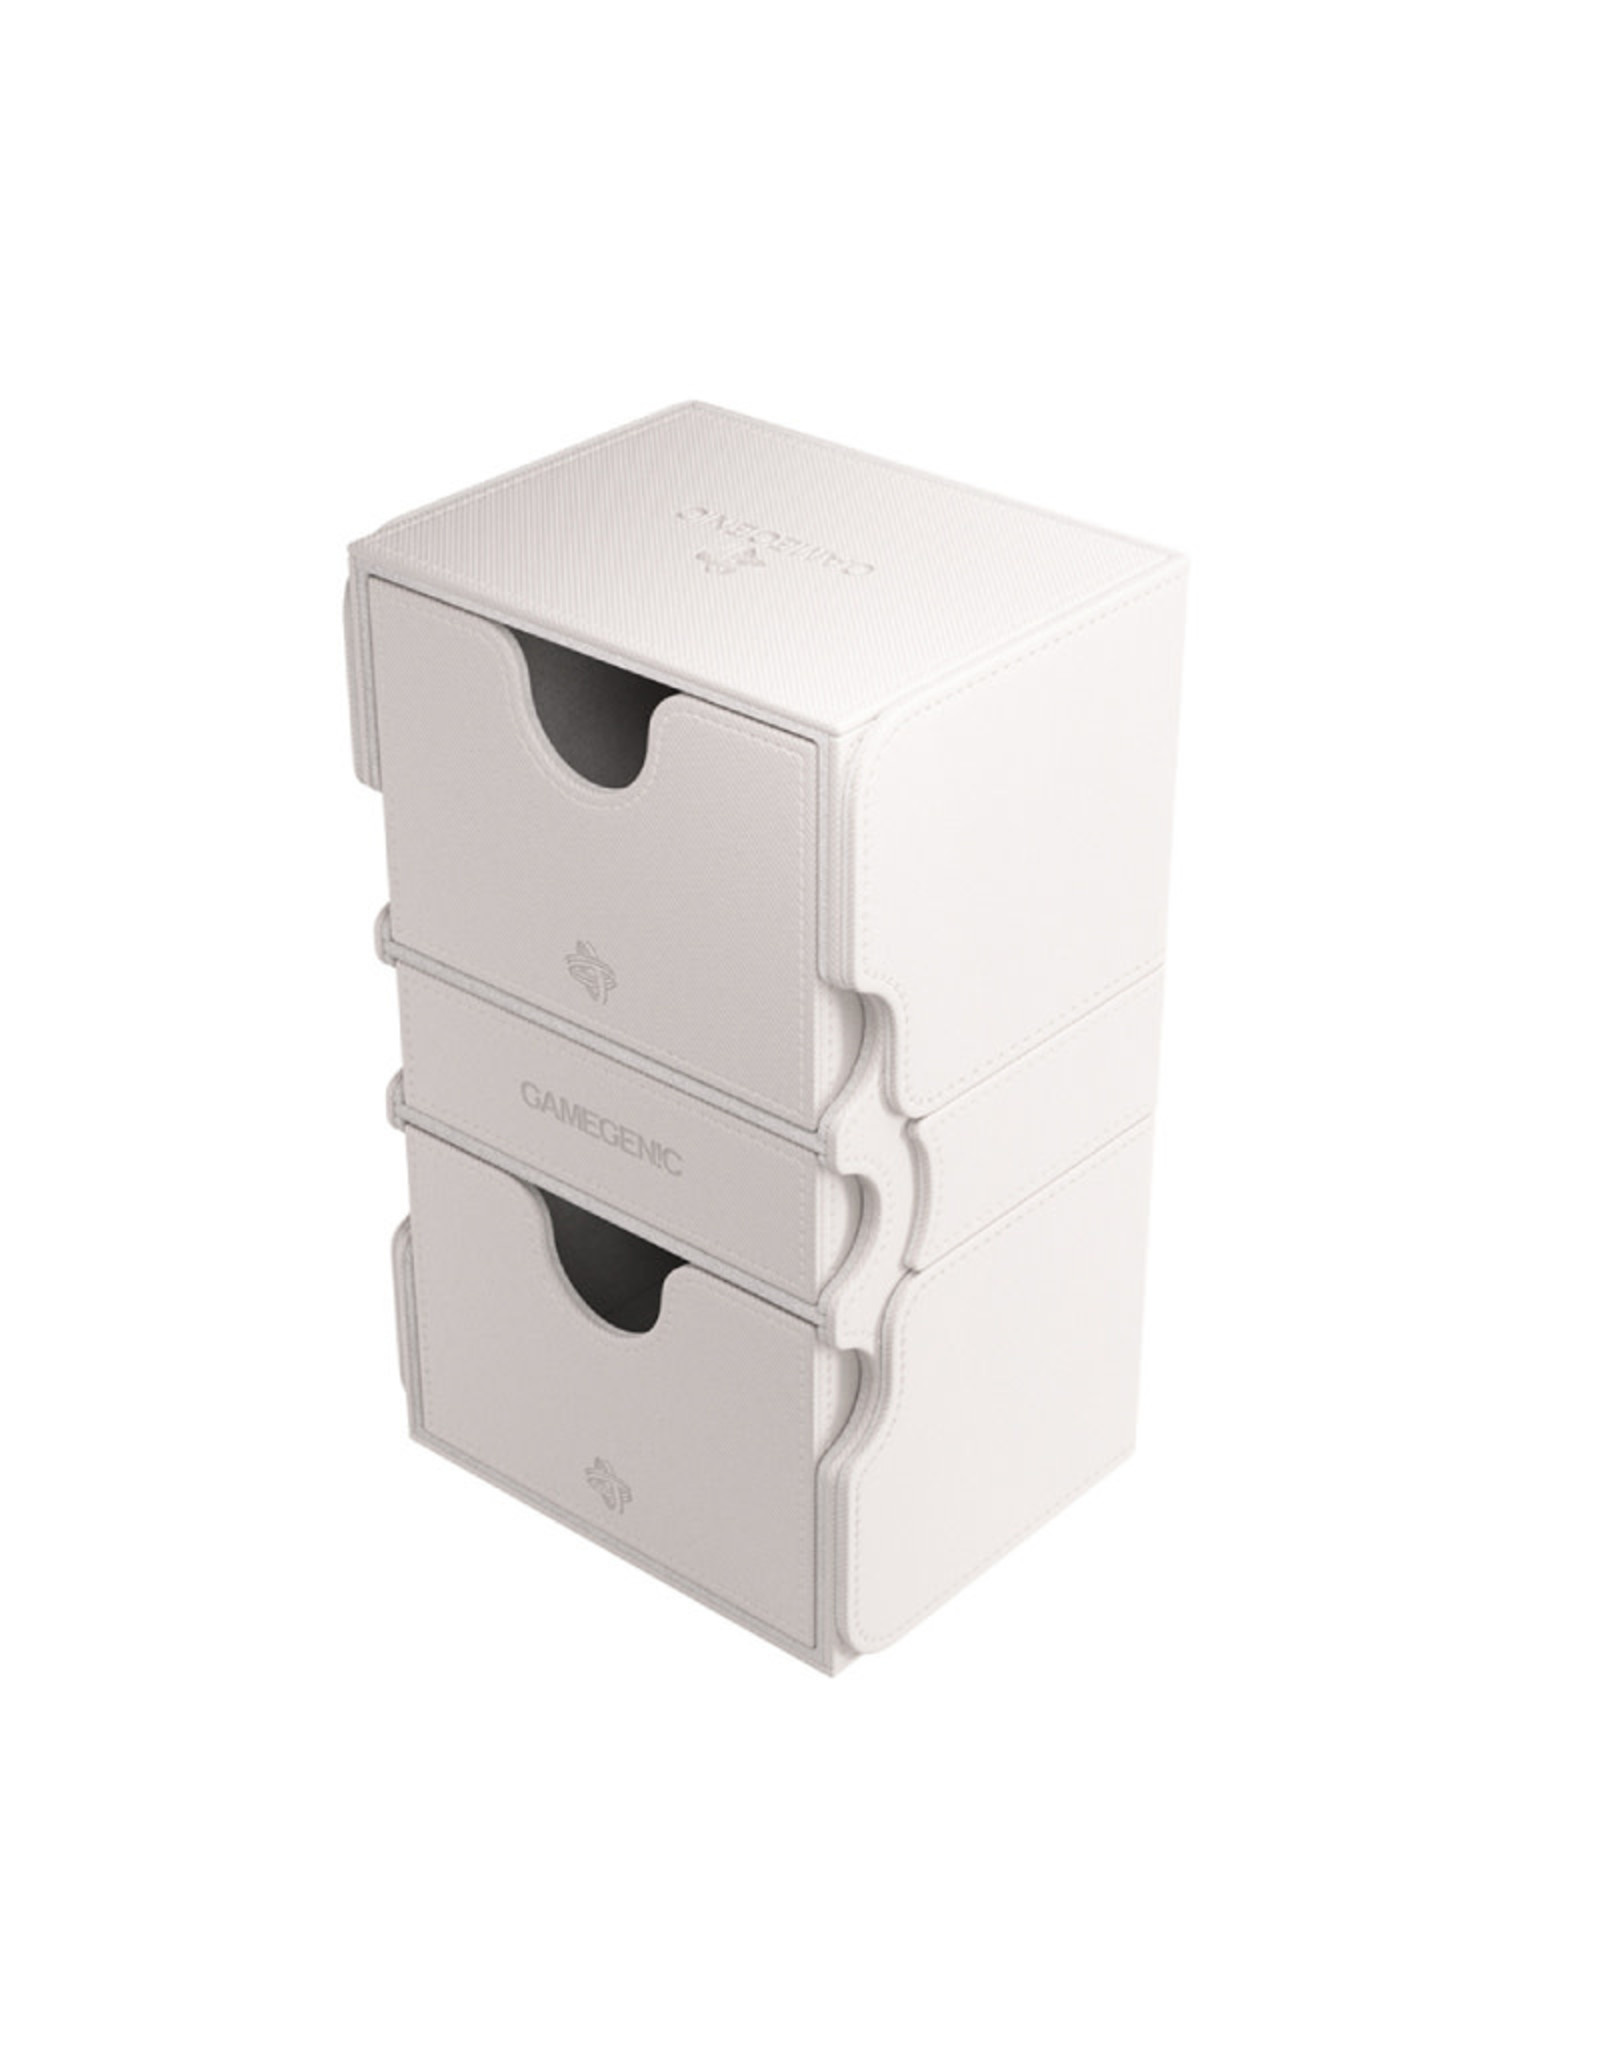 Deck Box: Stronghold XL 200+ White